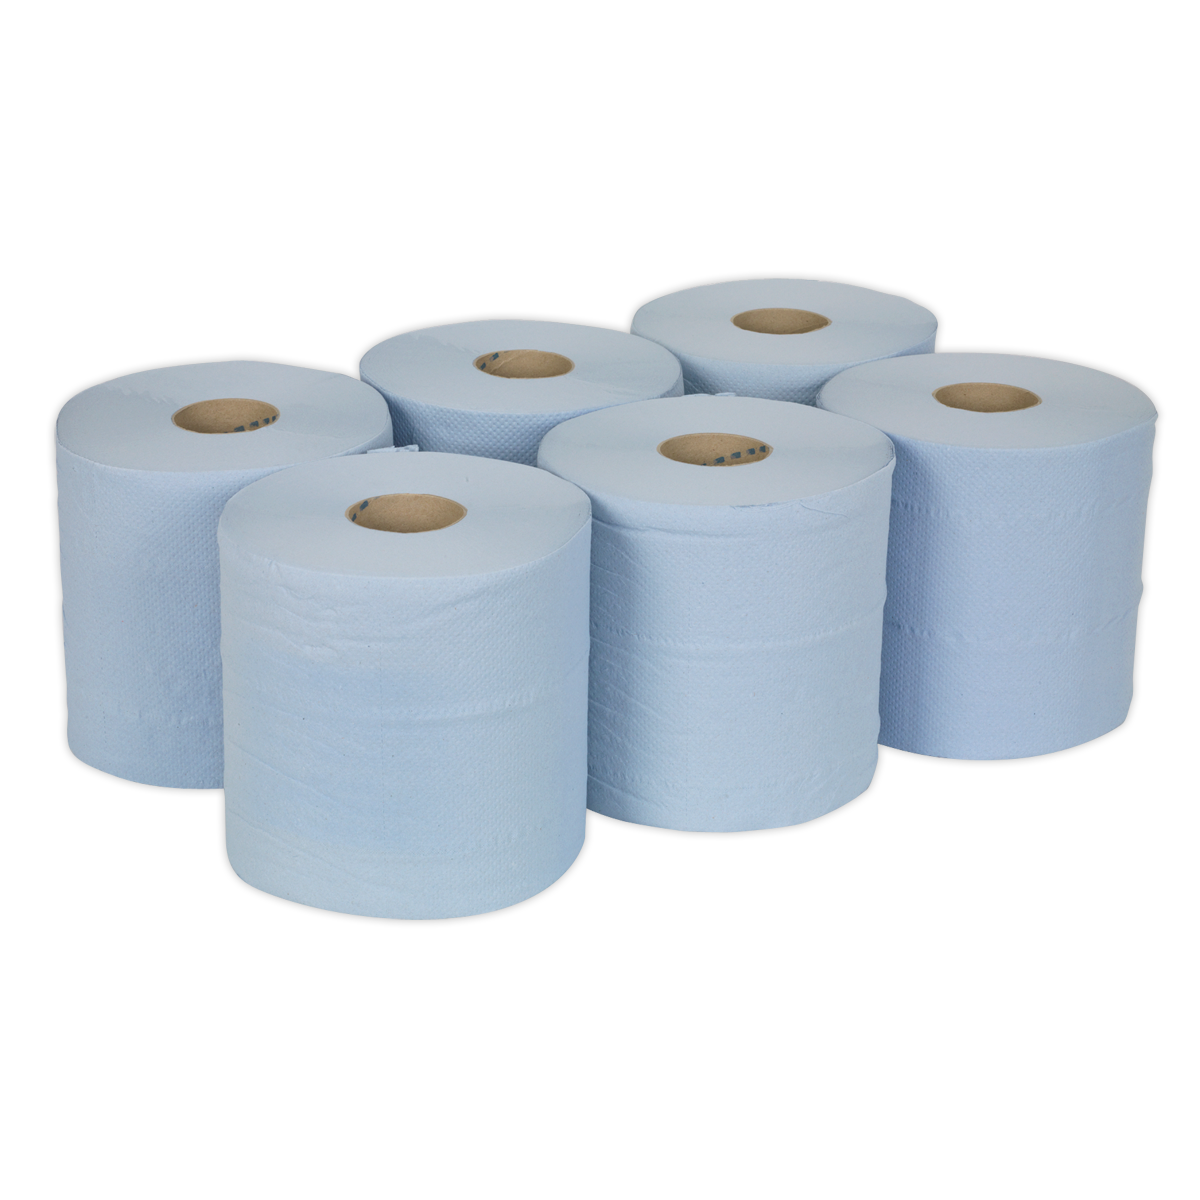 Paper Roll Blue 2-Ply Embossed 150m Pack of 6 - BLU150 - Farming Parts